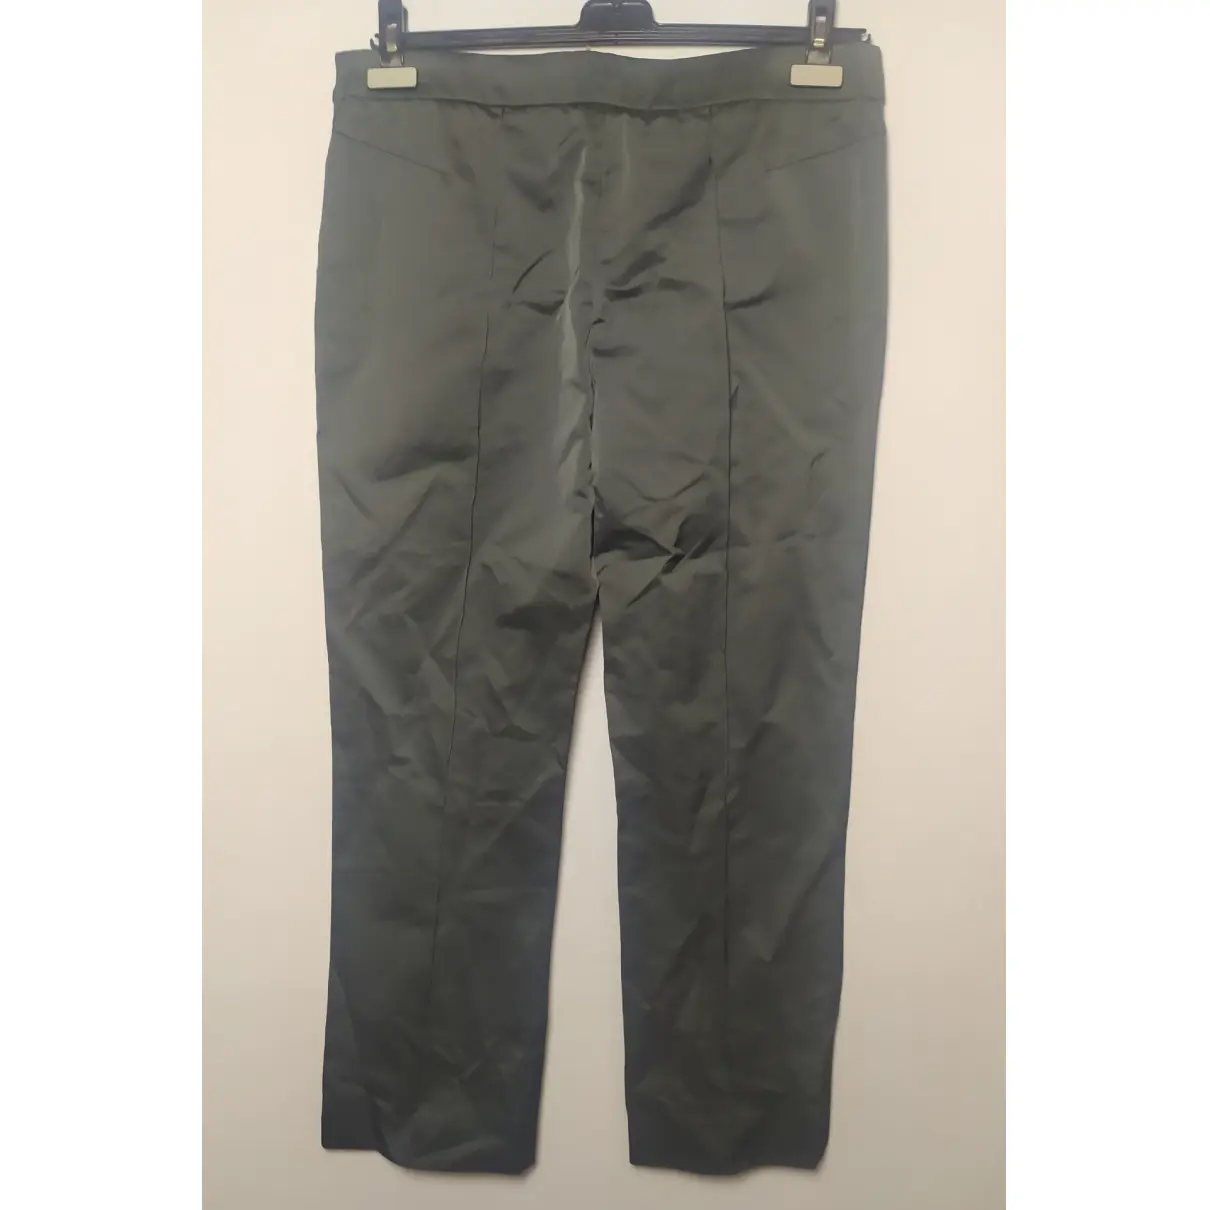 Buy Marni Trousers online